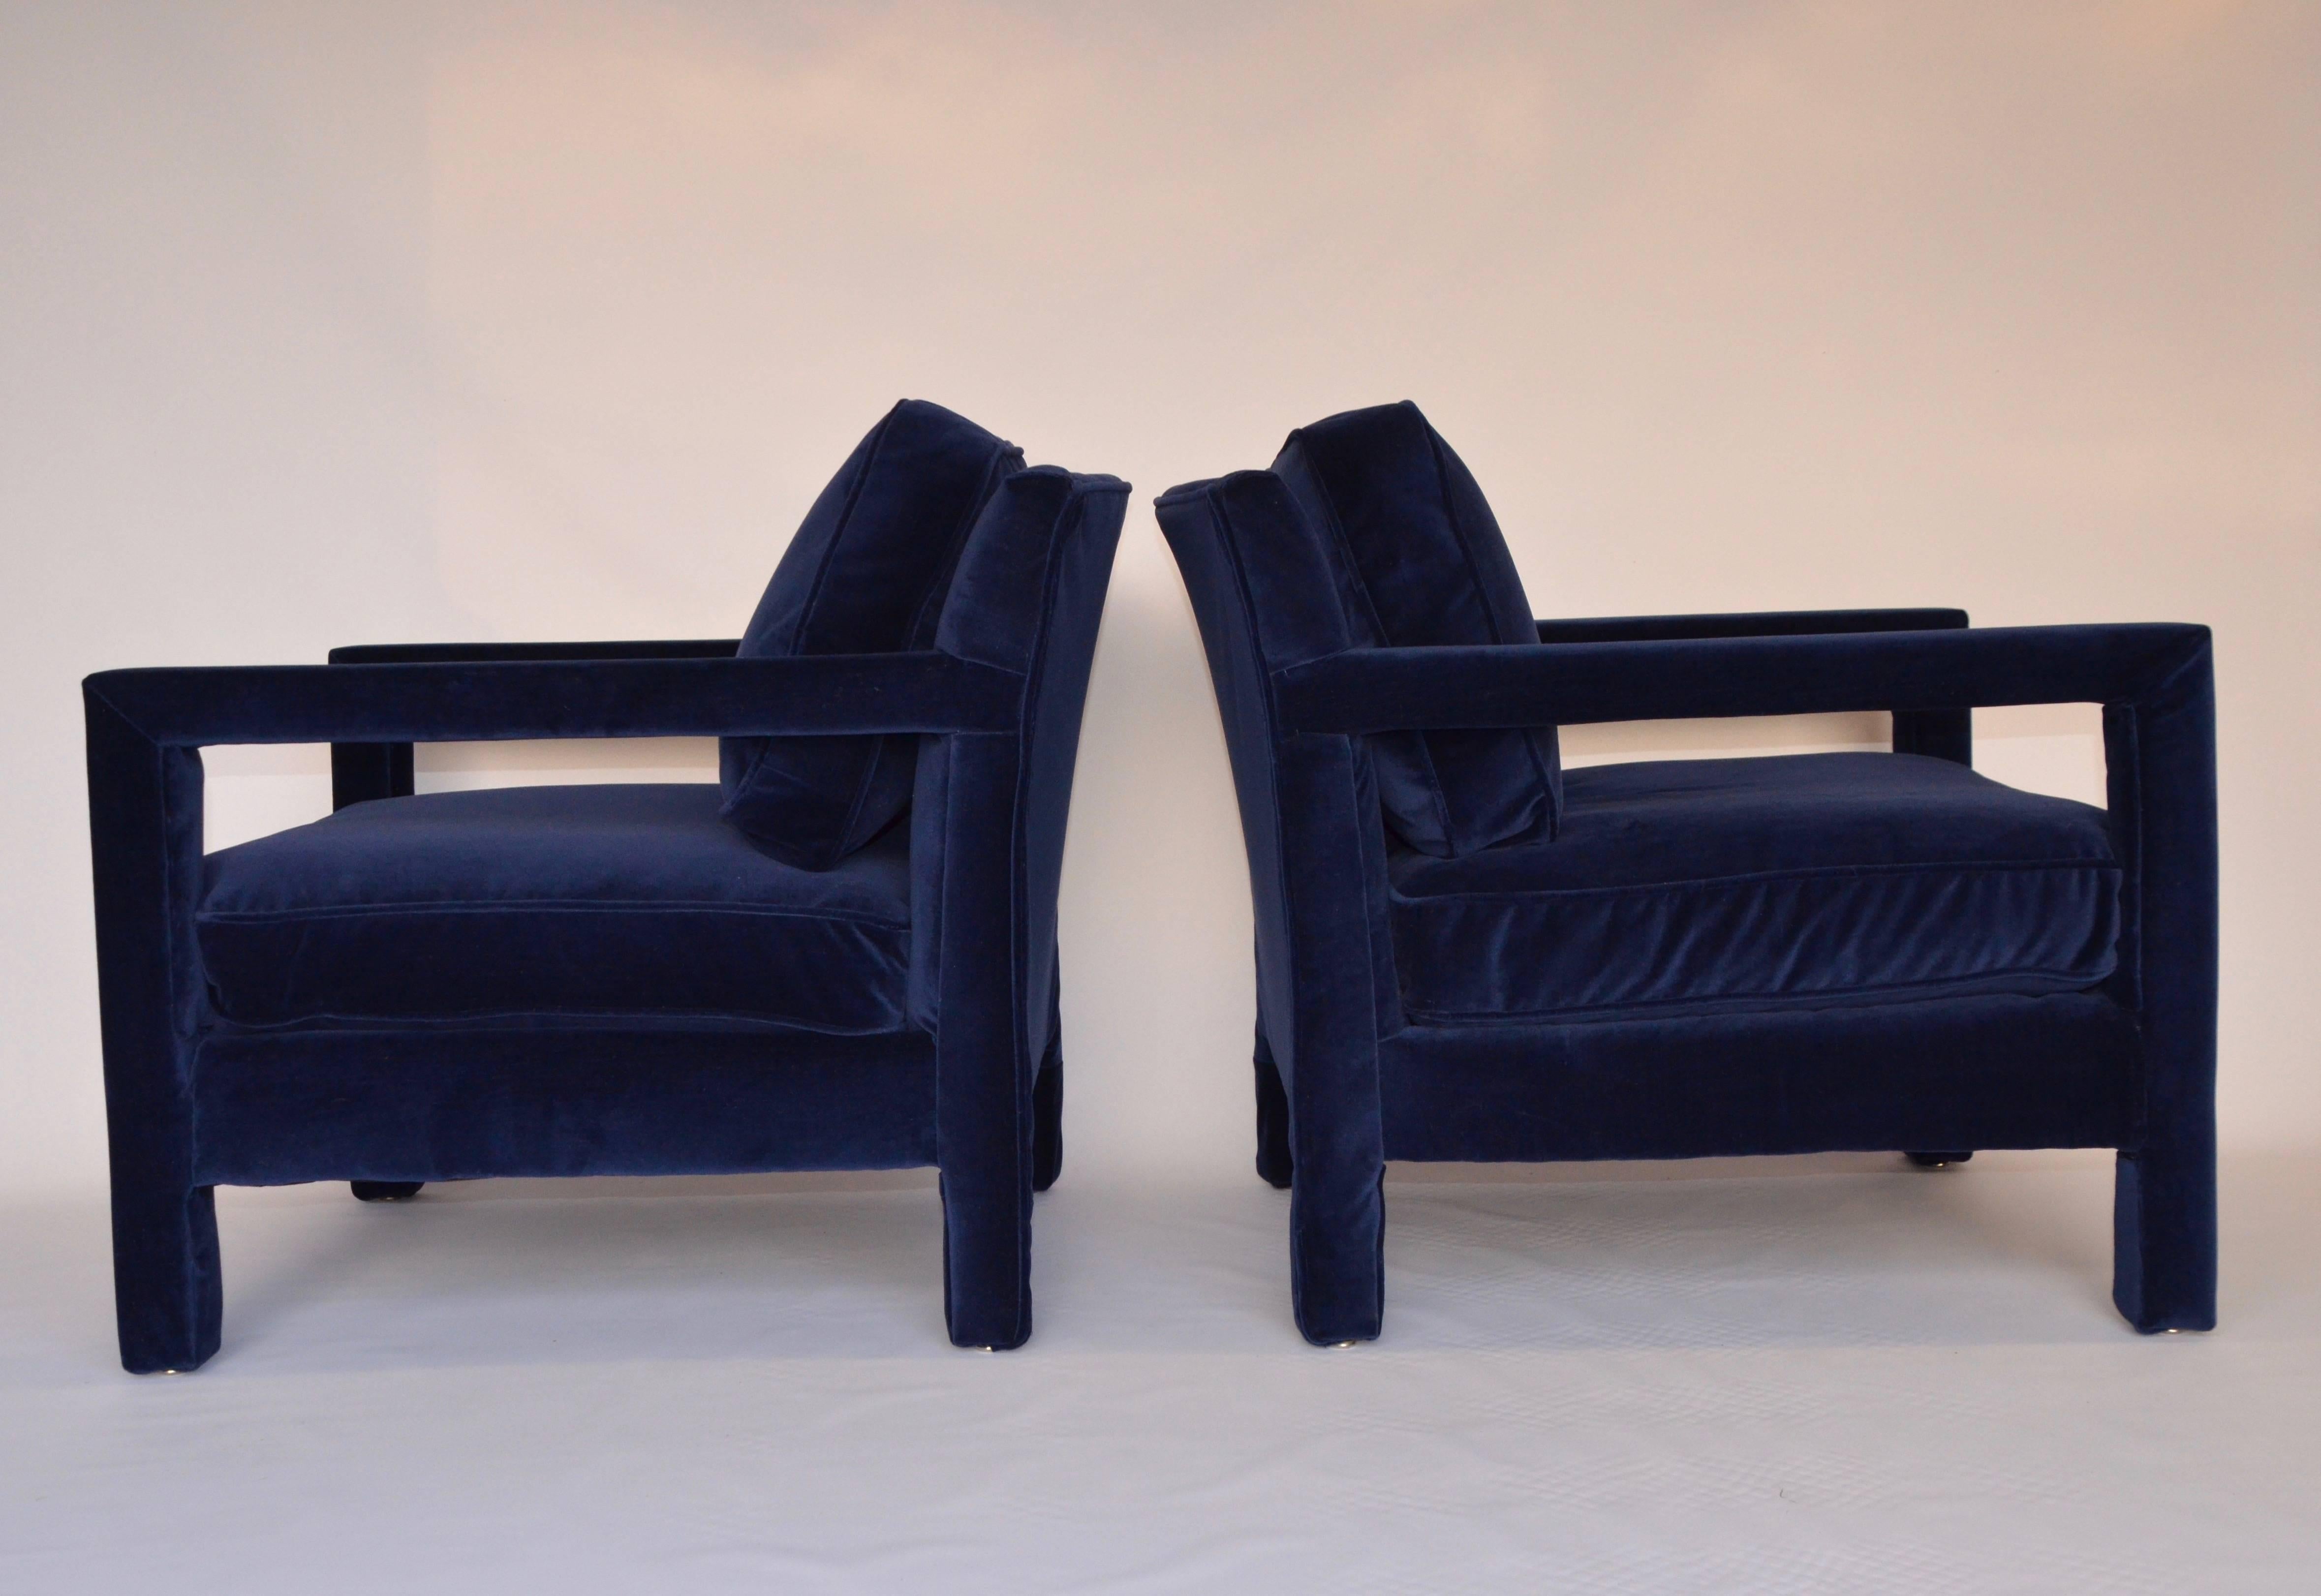 A beautiful pair of fully upholstered Parsons chairs in the style of Milo Baughman.  The chairs have been newly upholstered in a high quality blue velvet. Each chair has a removable back and seat cushion. Extremely comfortable.  Made by Bernhardt